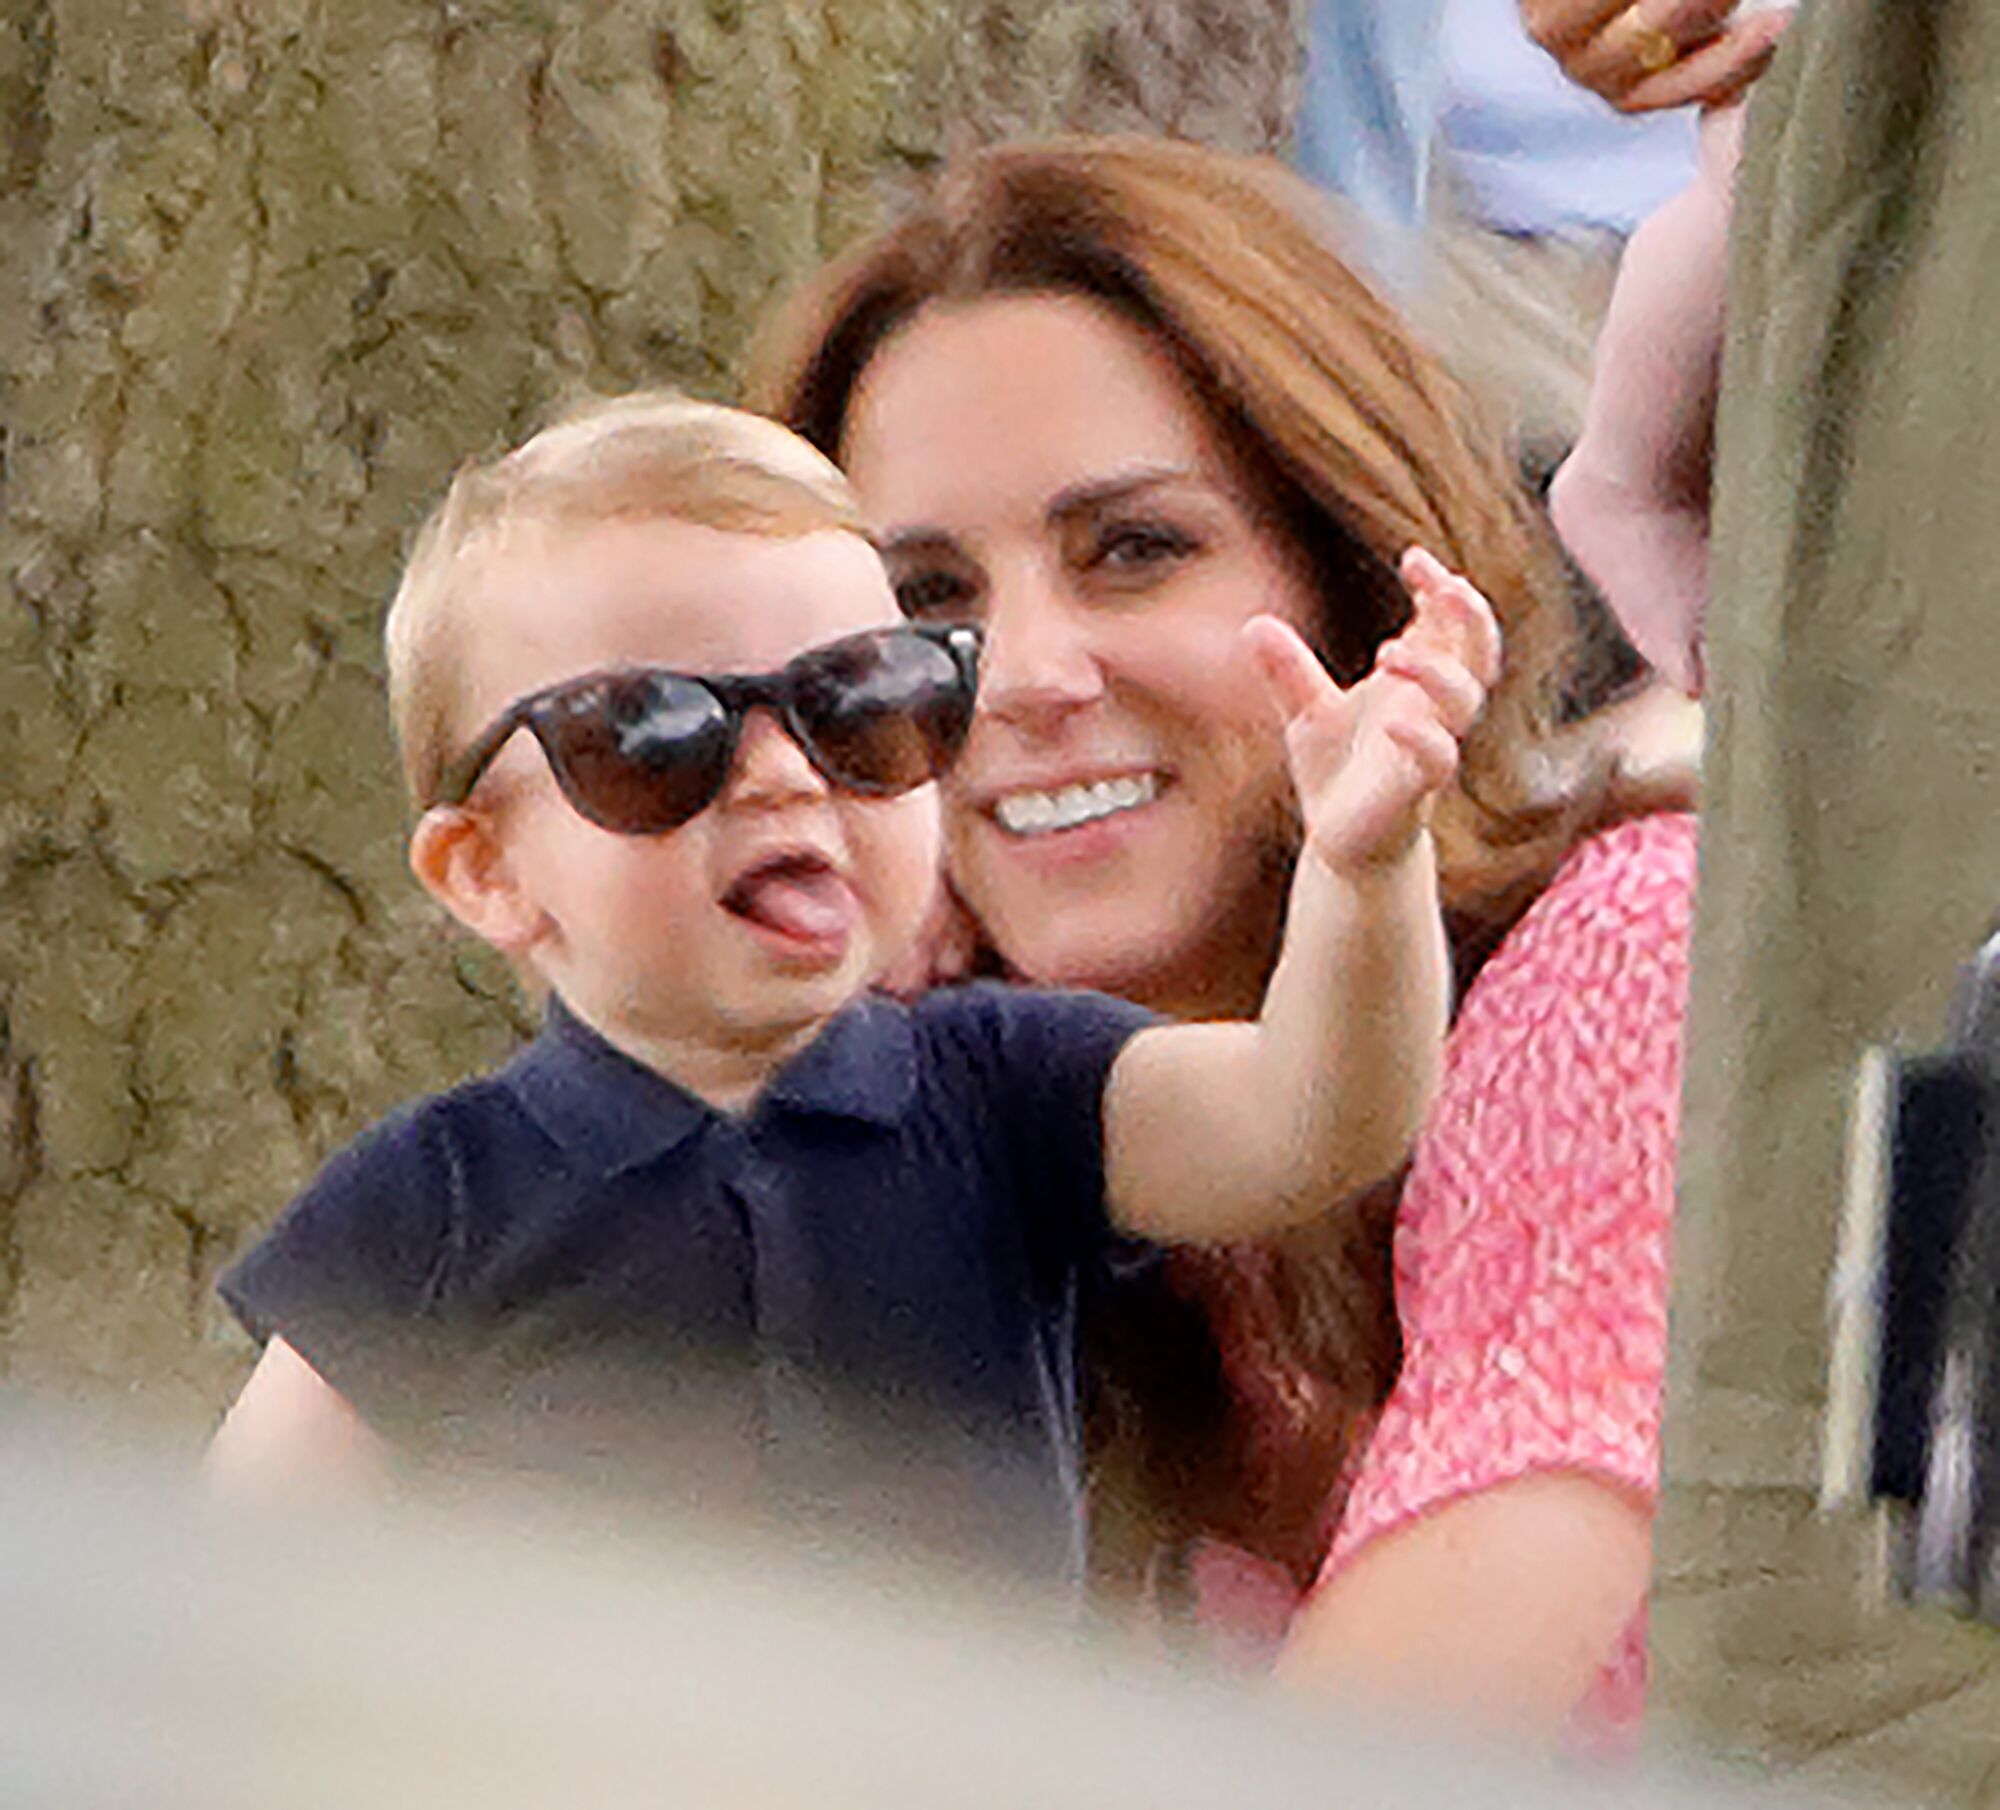 Prince Louis Funny Behind The Scenes Birthday Photos Had Fans Laughing